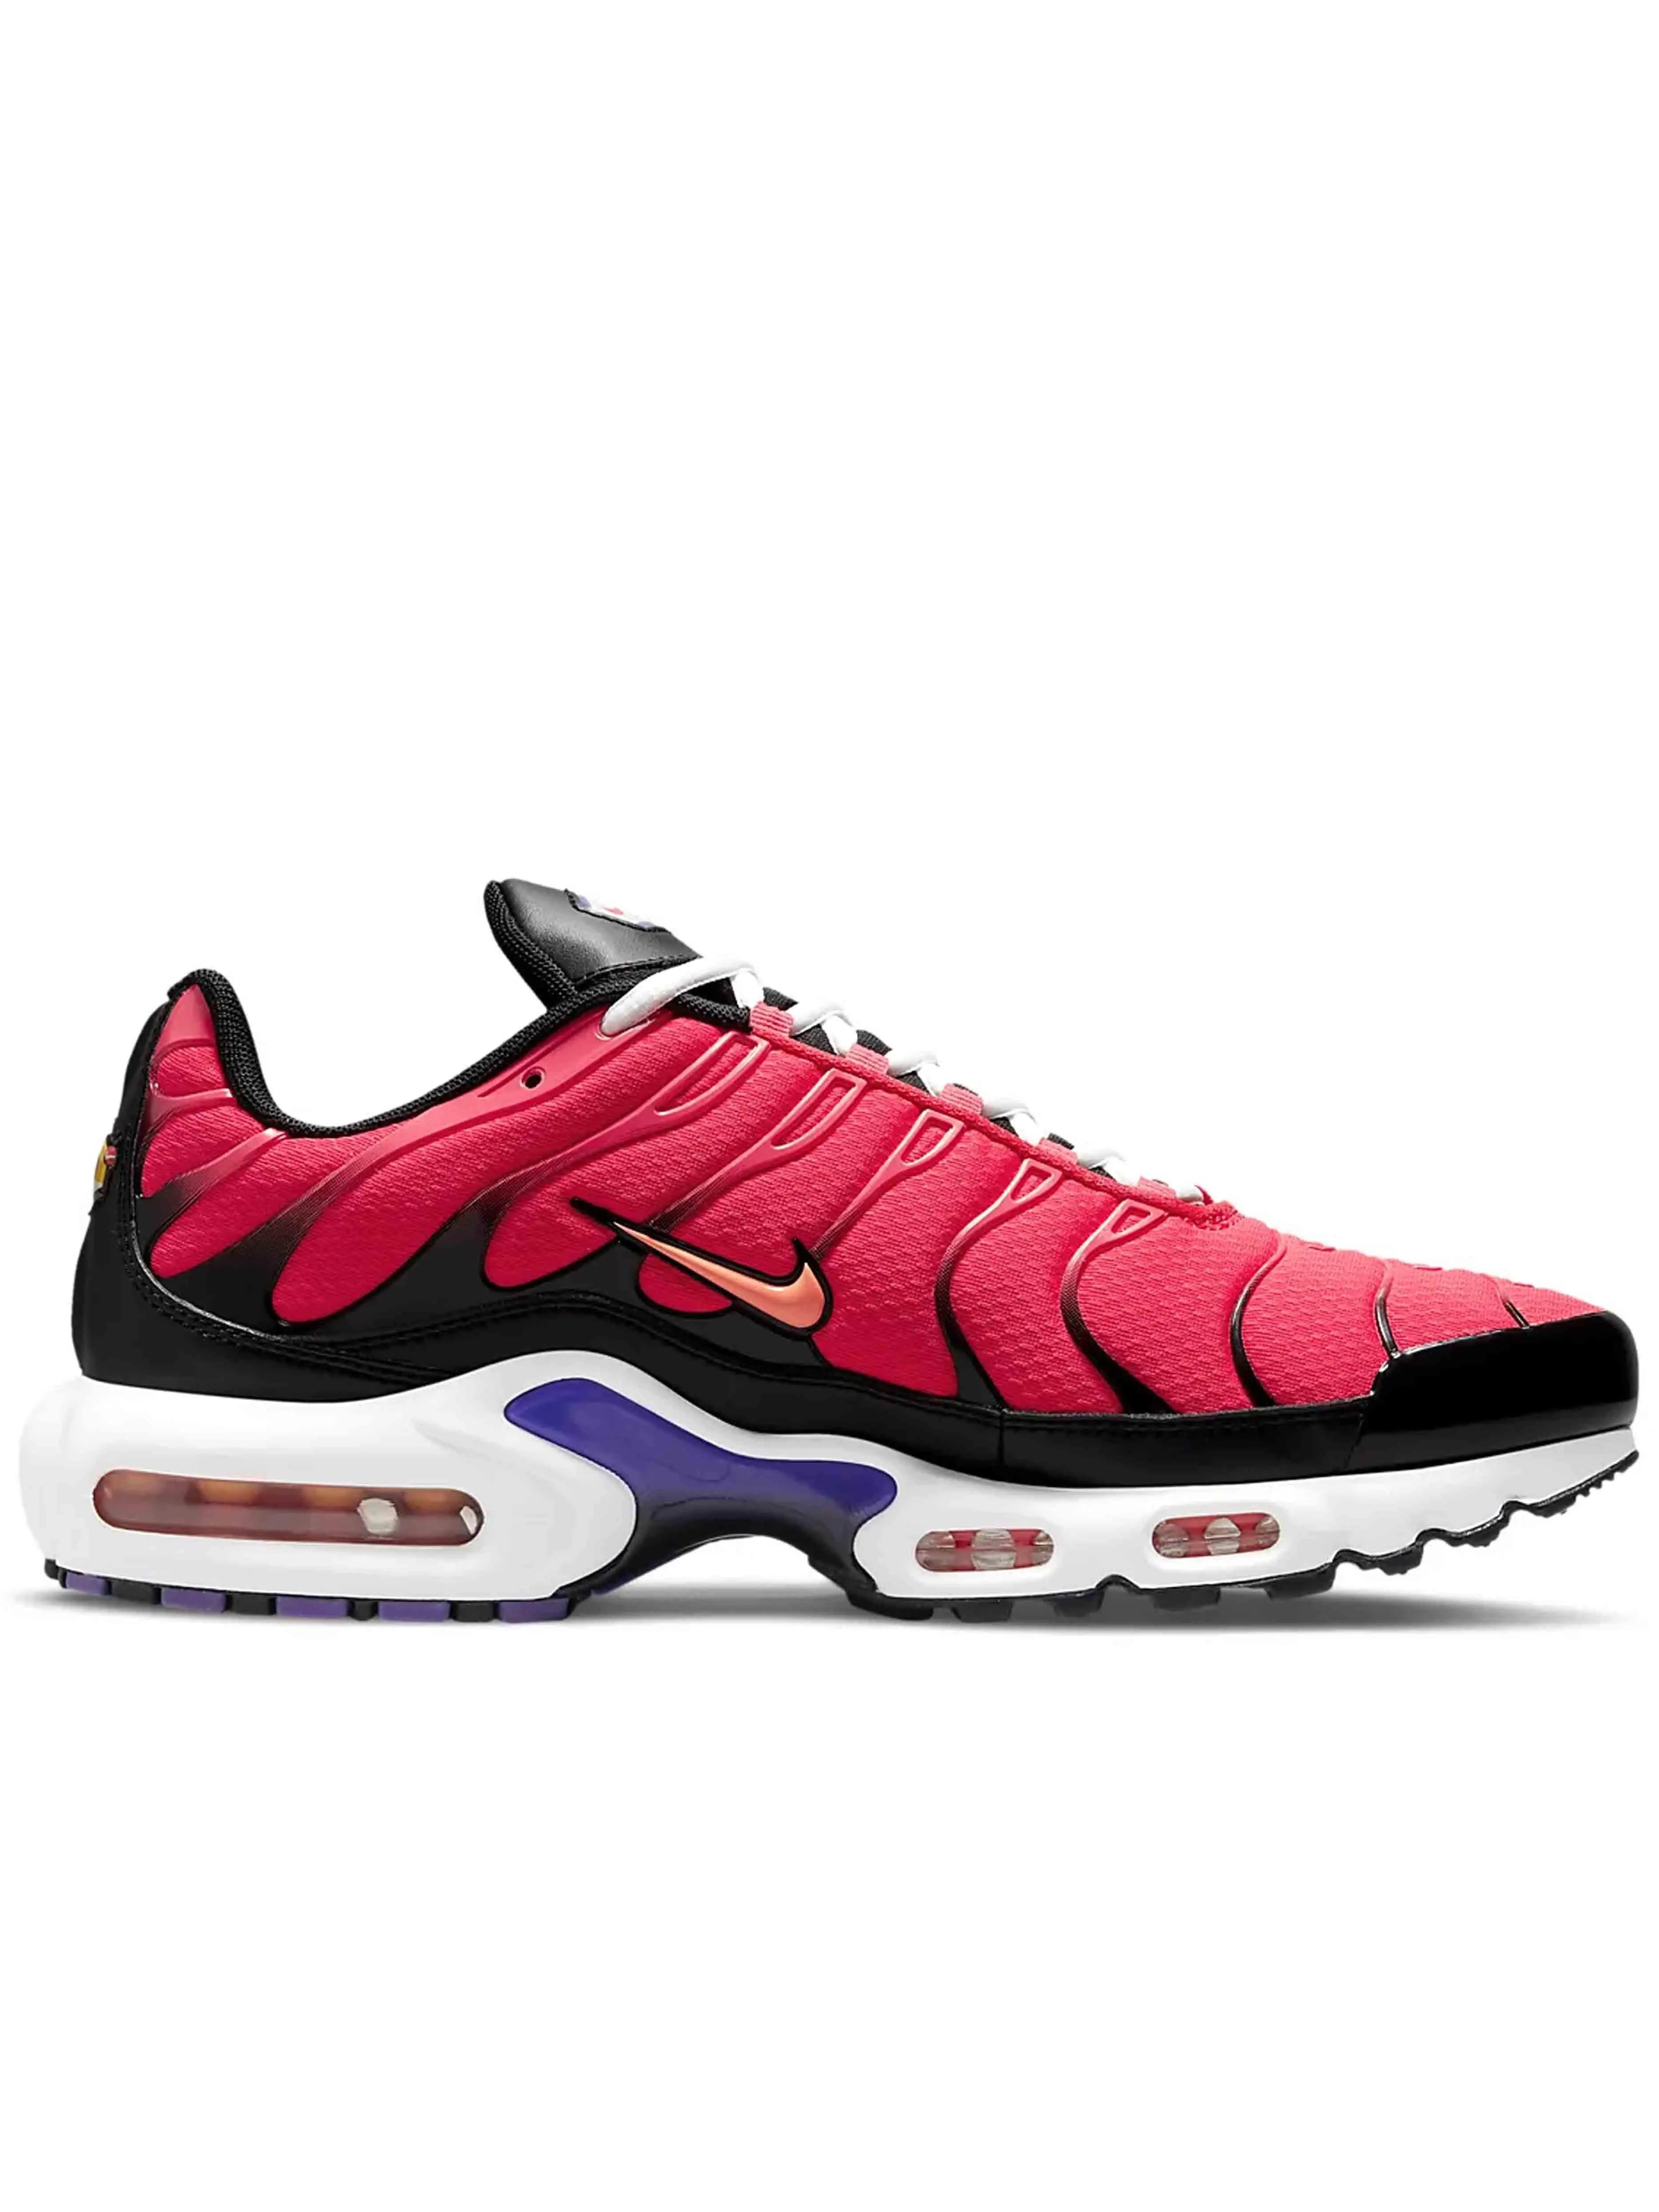 Nike Air Max Plus Siren Red in Auckland, New Zealand - Prior